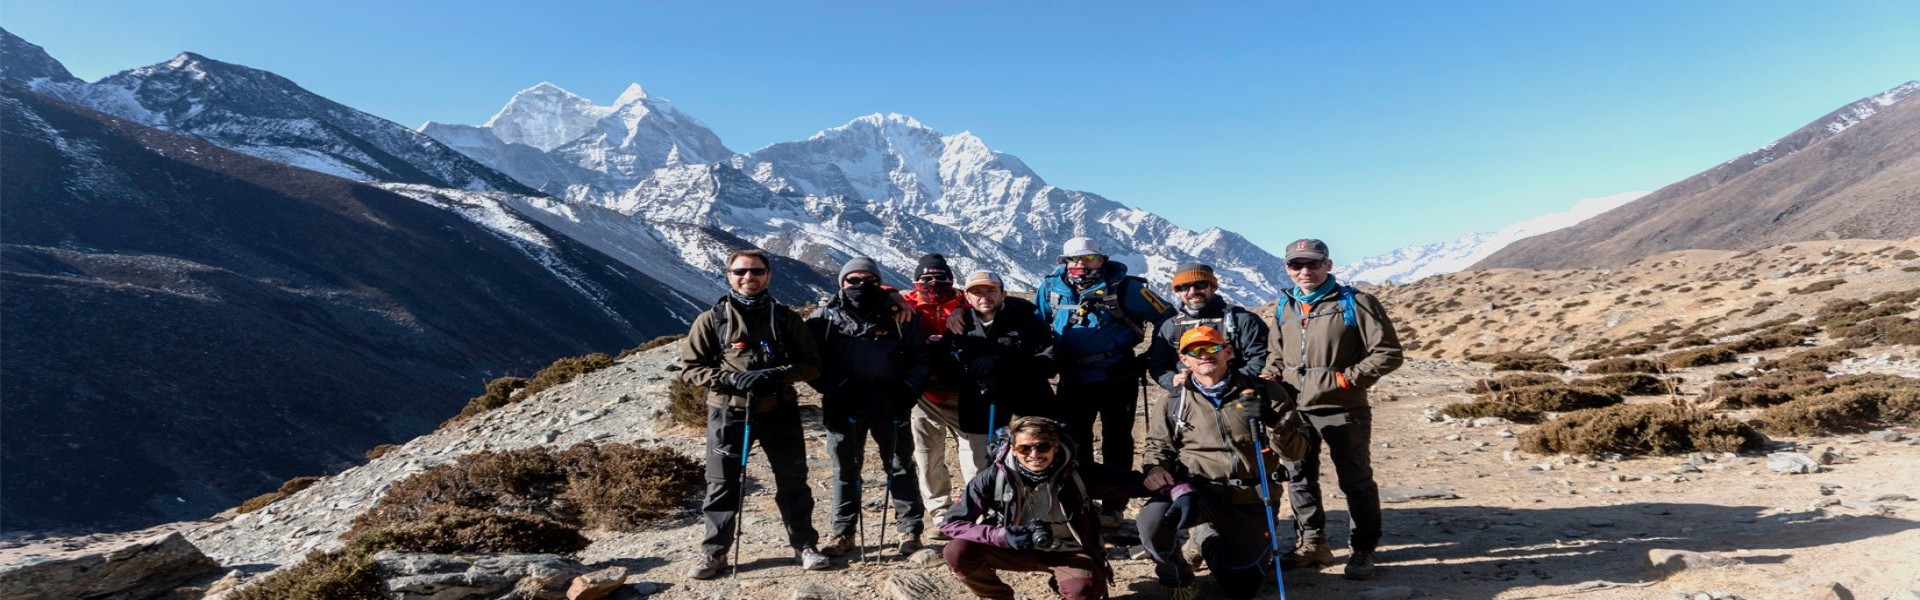 Everest Base Camp top 11 Trekking Tips No One Talks About